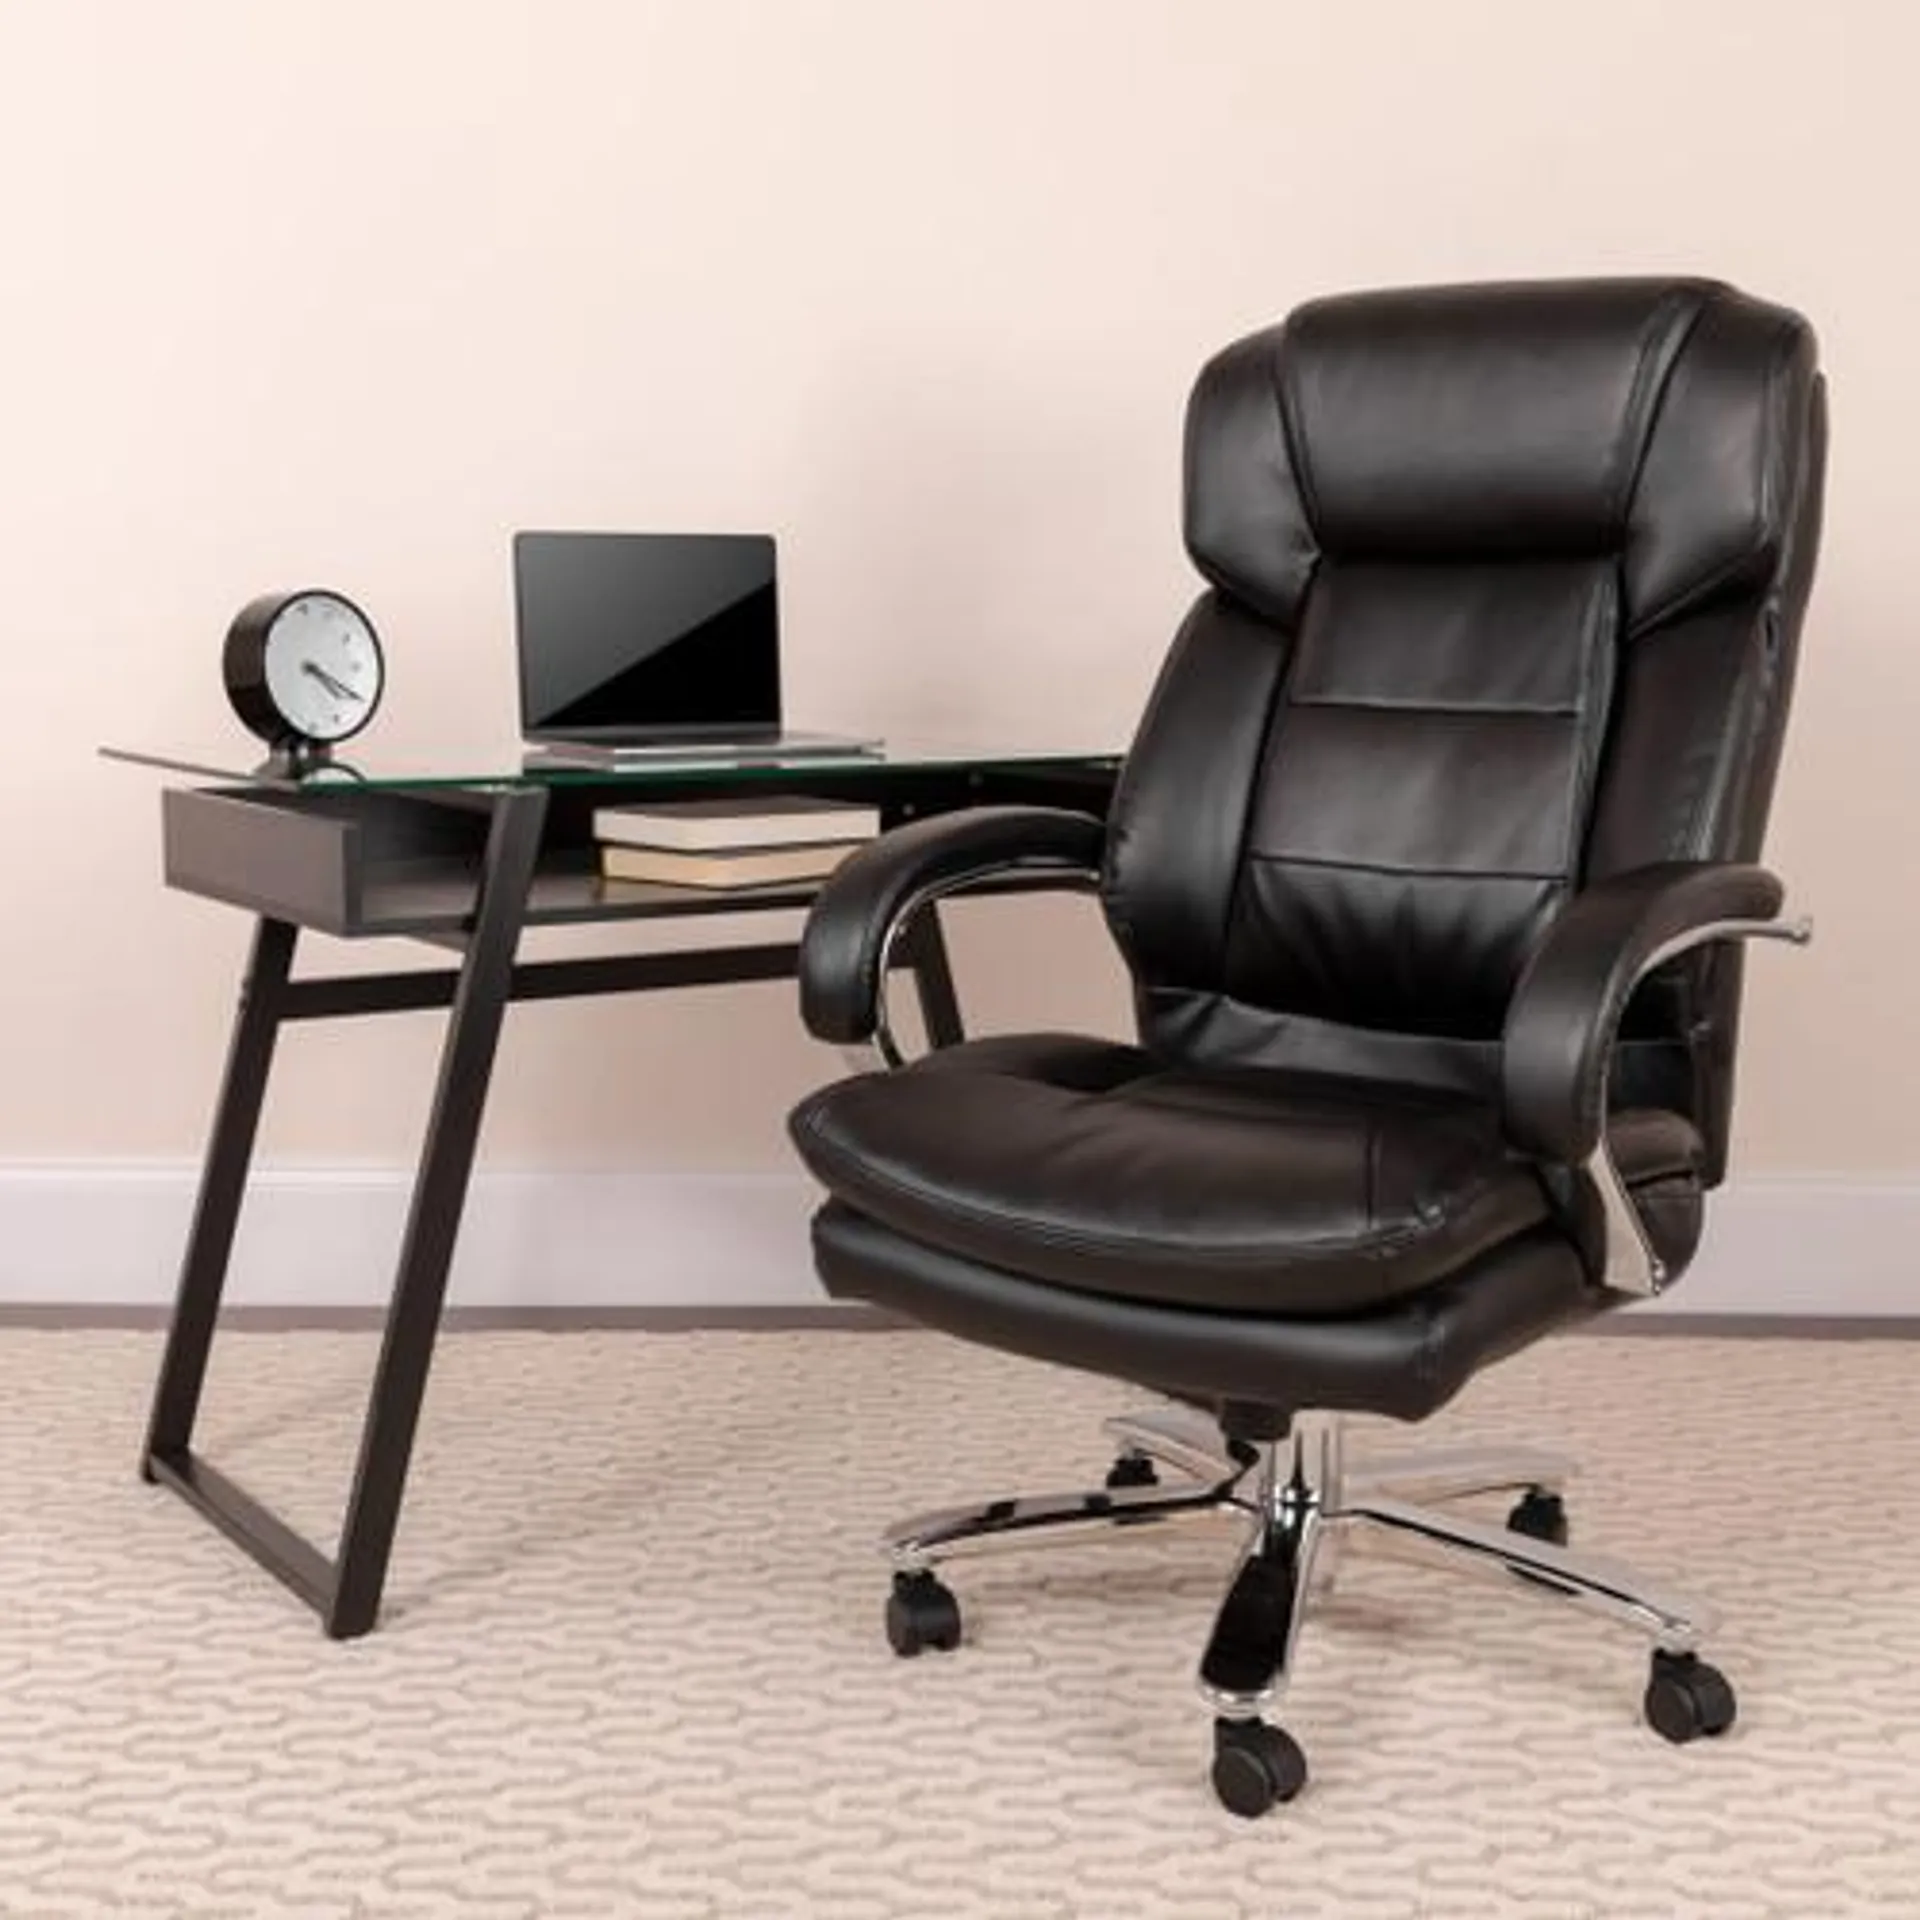 Big & Tall Office Chair | Black LeatherSoft Swivel Executive Desk Chair with Wheels - GO2078LEAGG